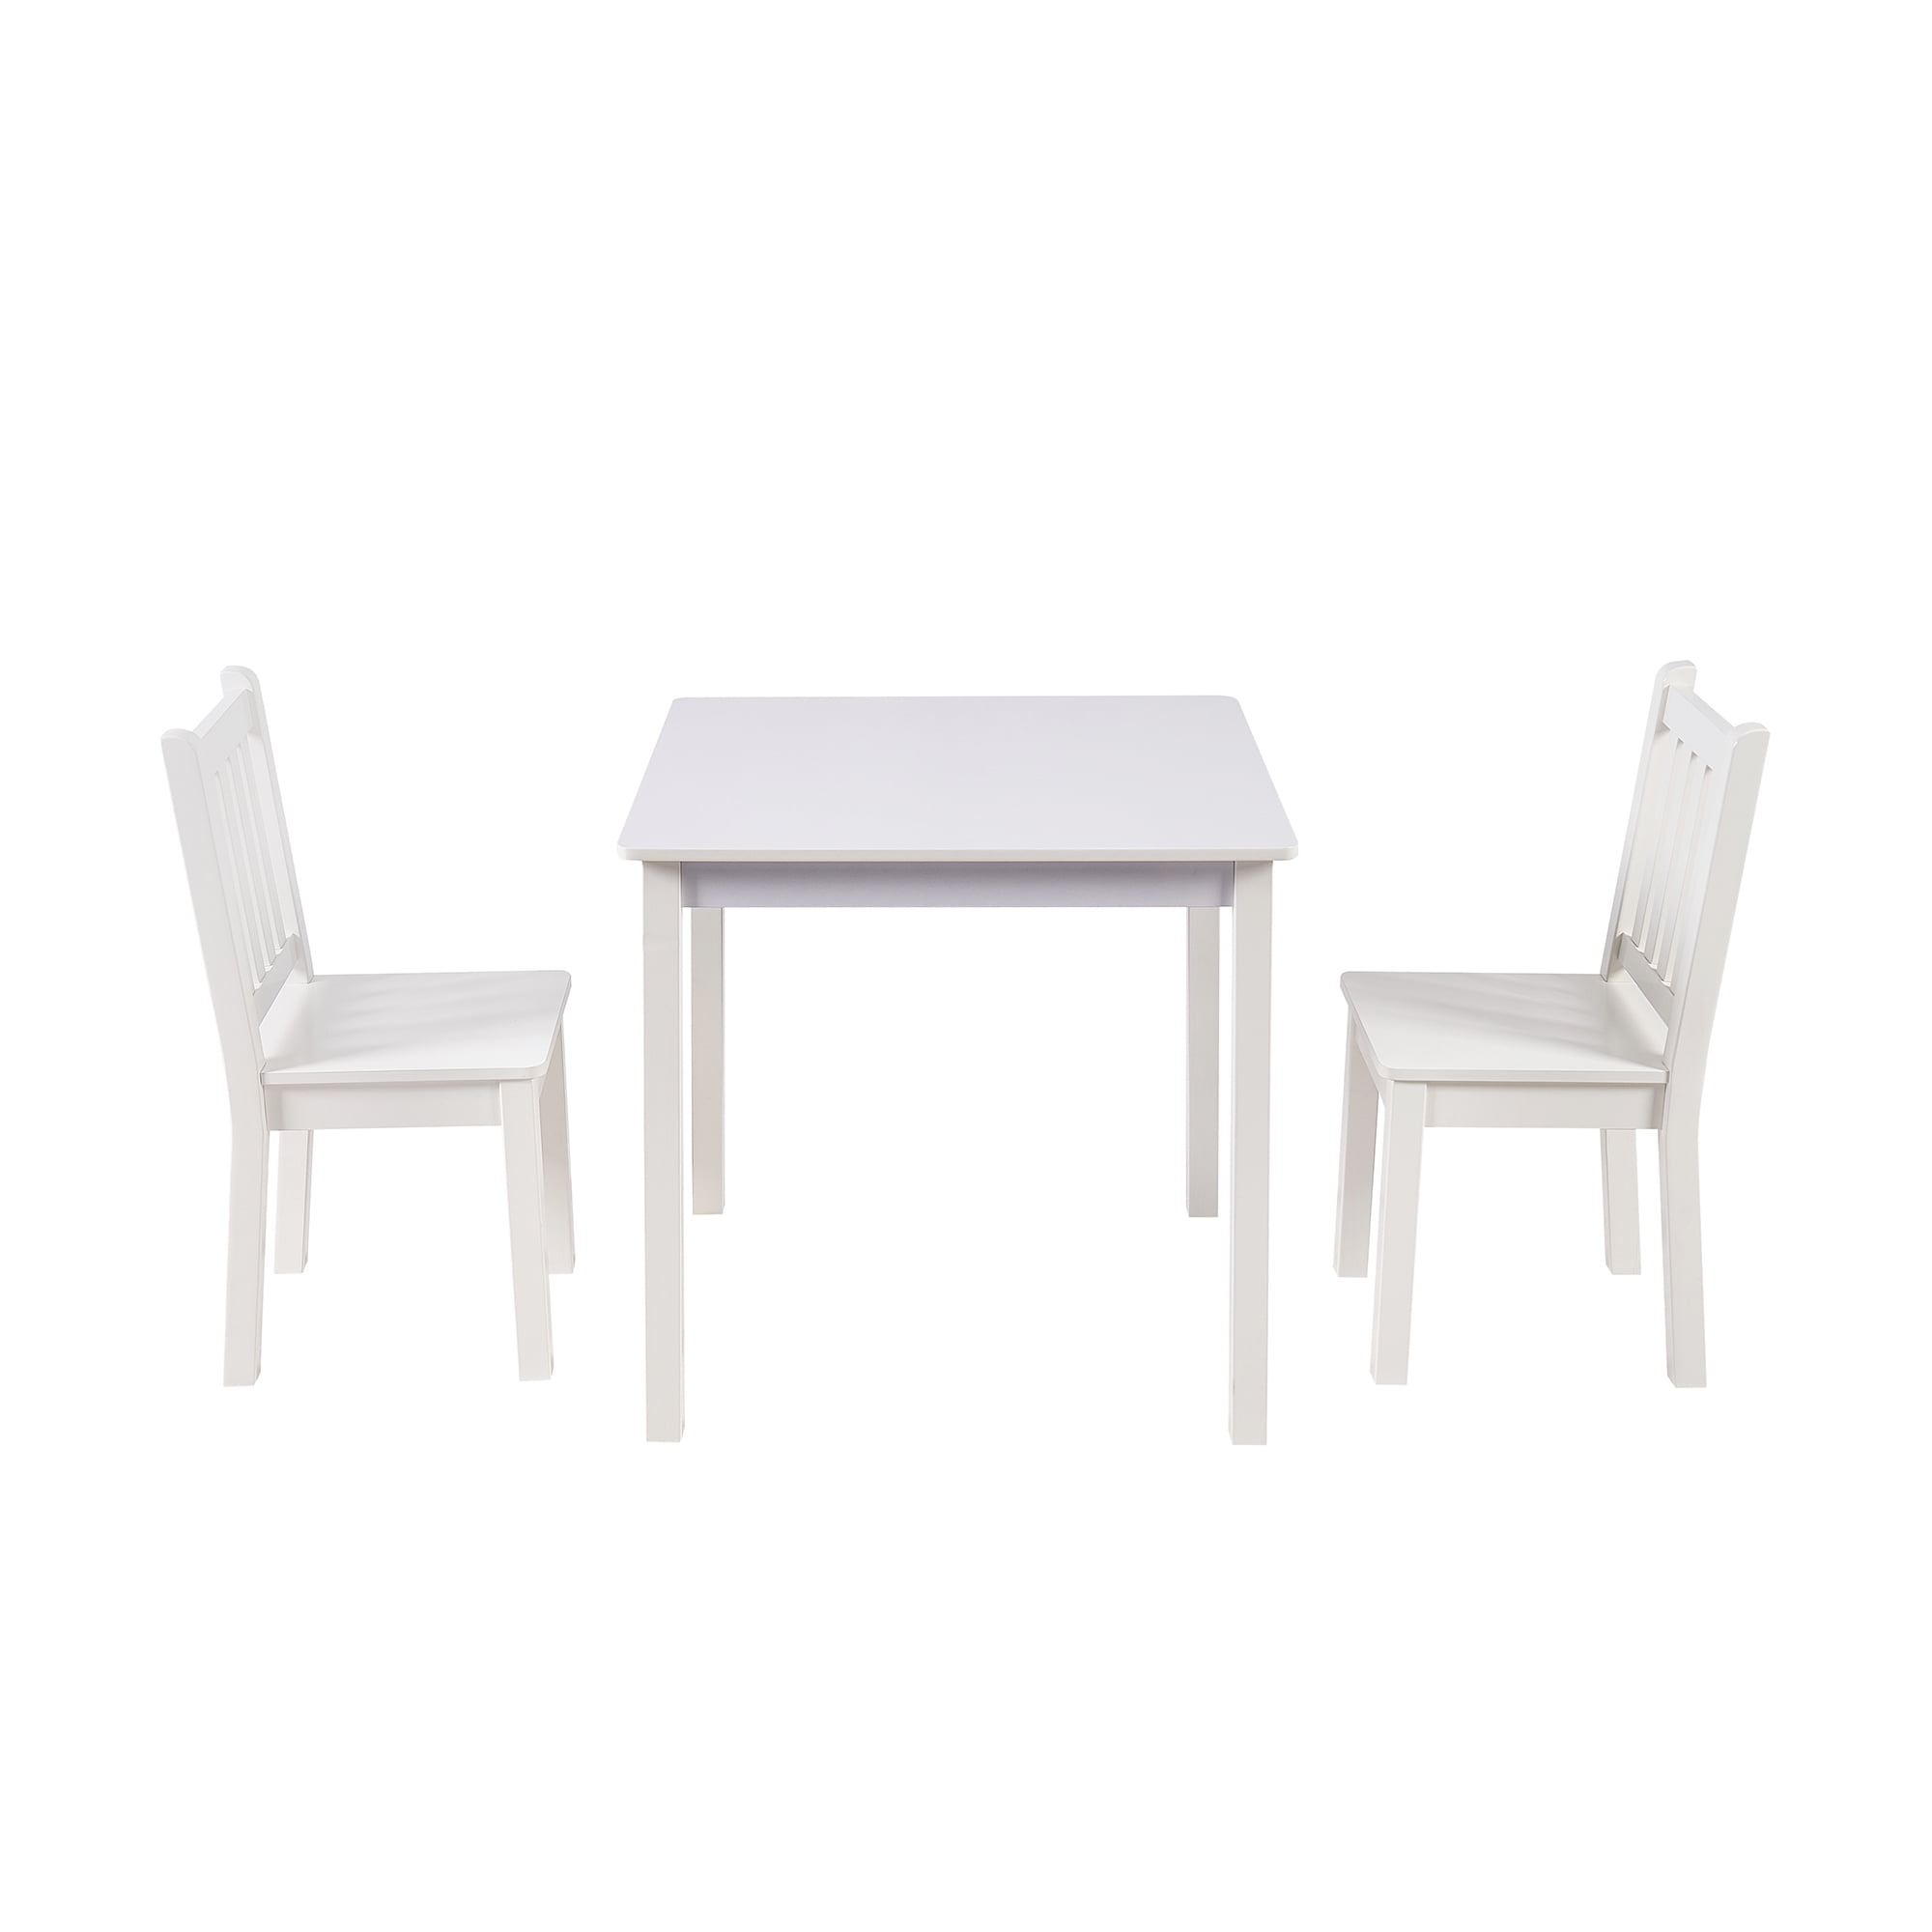 Toffy & Friends Wooden Storage Table and Chairs Set, White, 3-Piece Set,  Ideal for Children's Learning, Activity Table or Dining